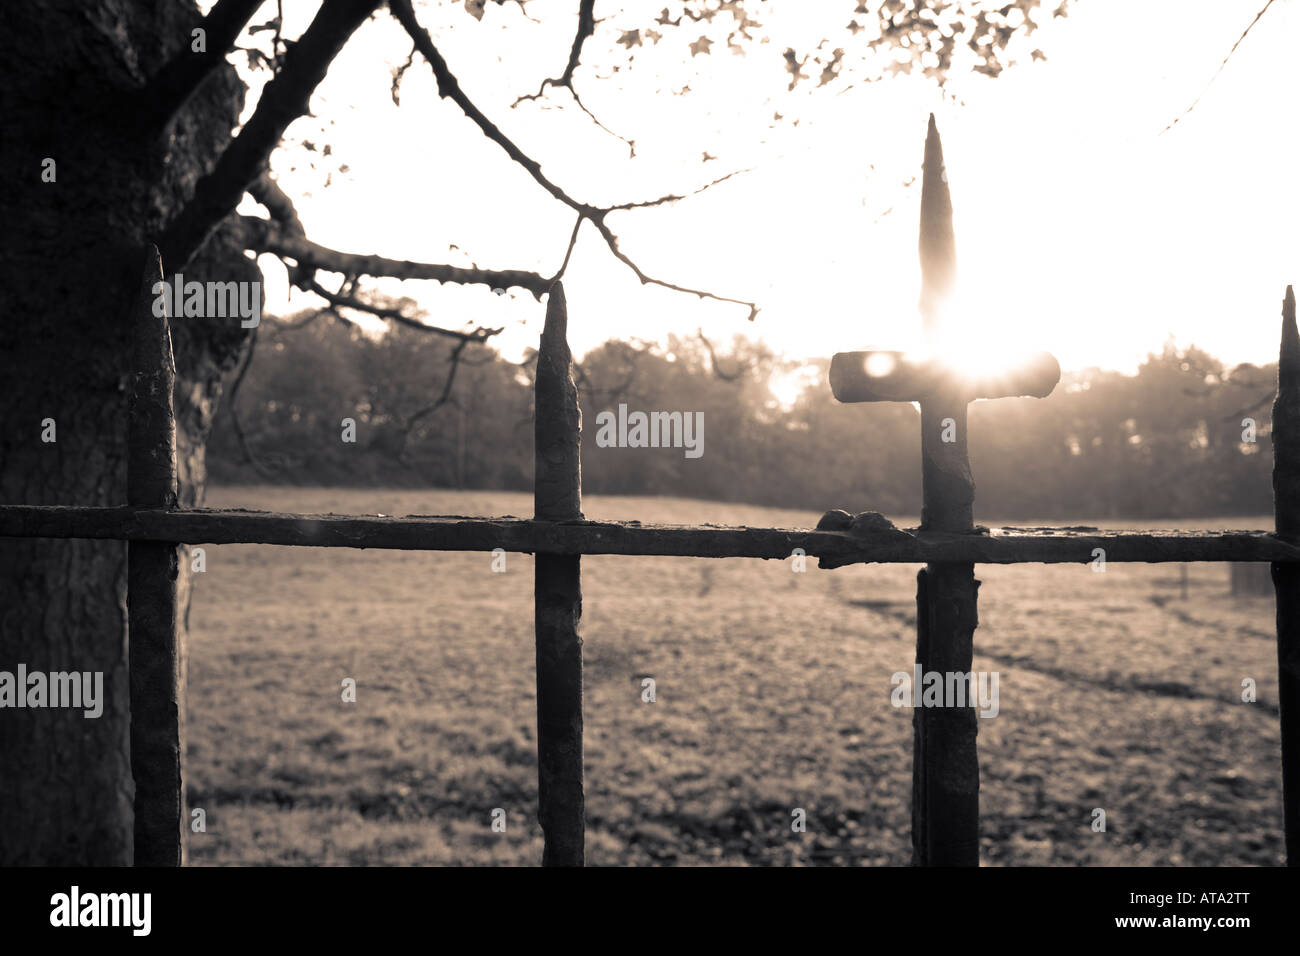 Moody conceptual image showing iron cross on fence with sunrise and field in the background Stock Photo